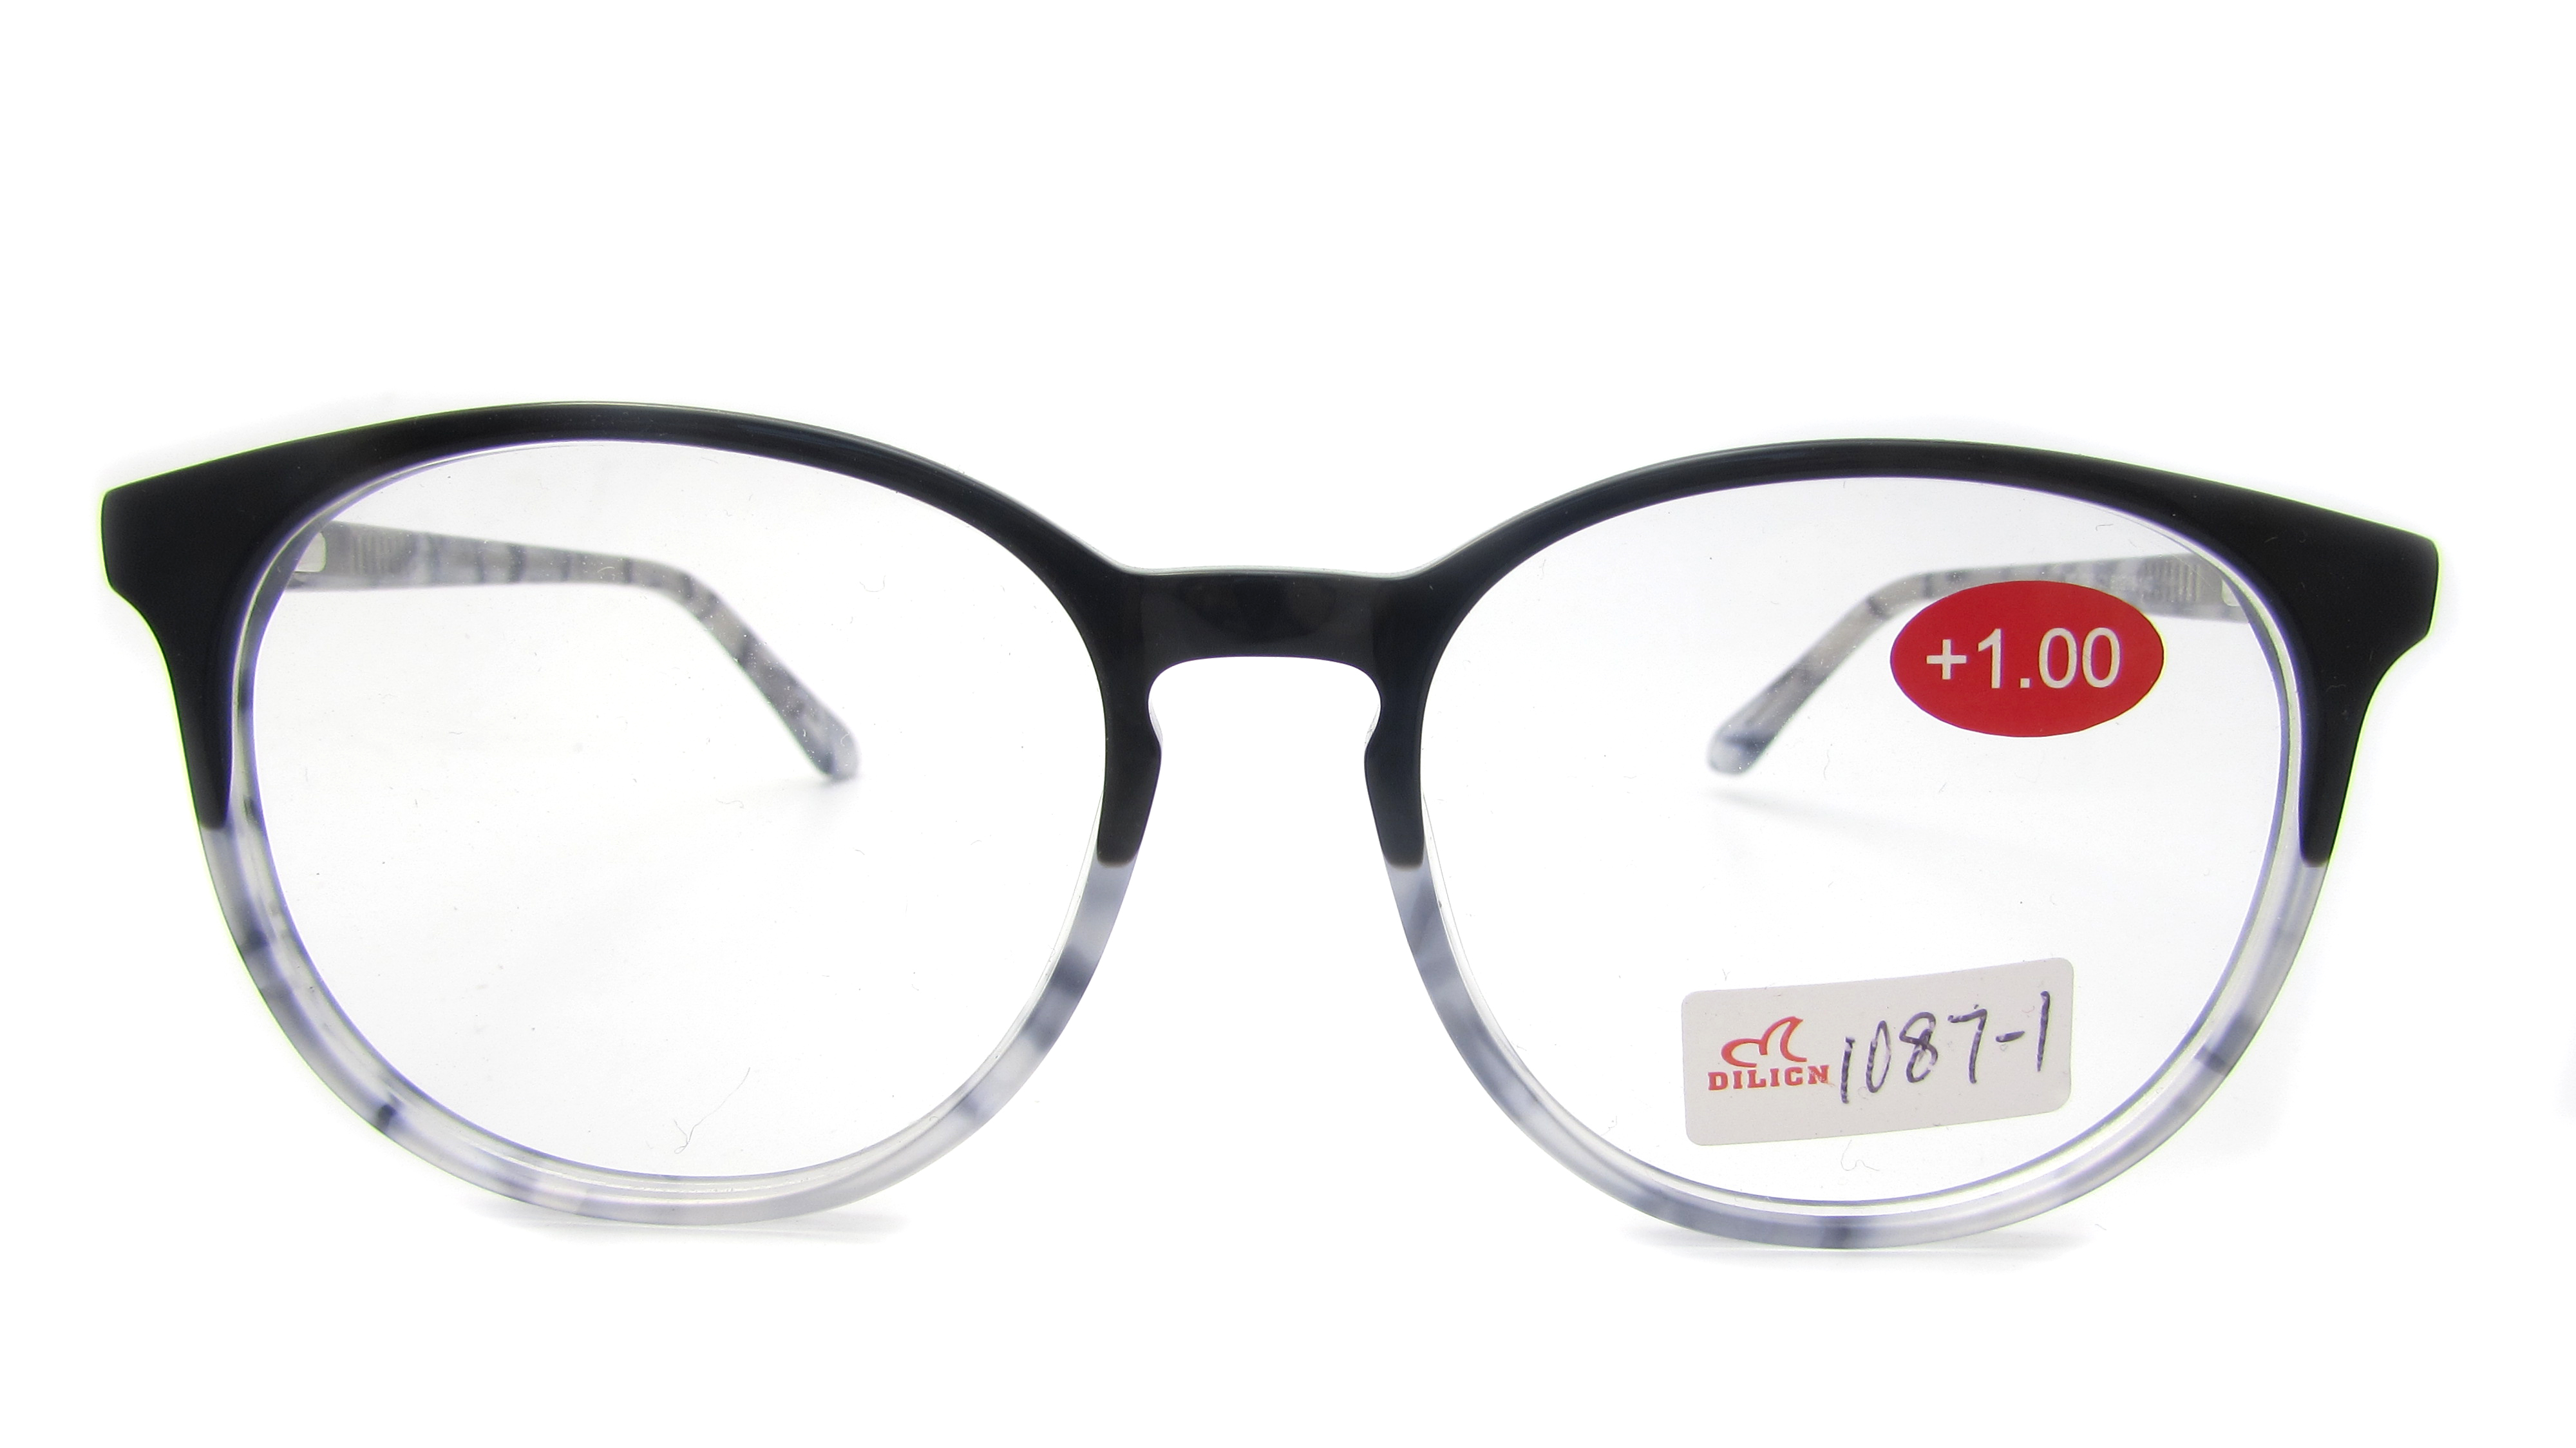 Acetate reading glasses from China manufacturer - Wenzhou Dilicn